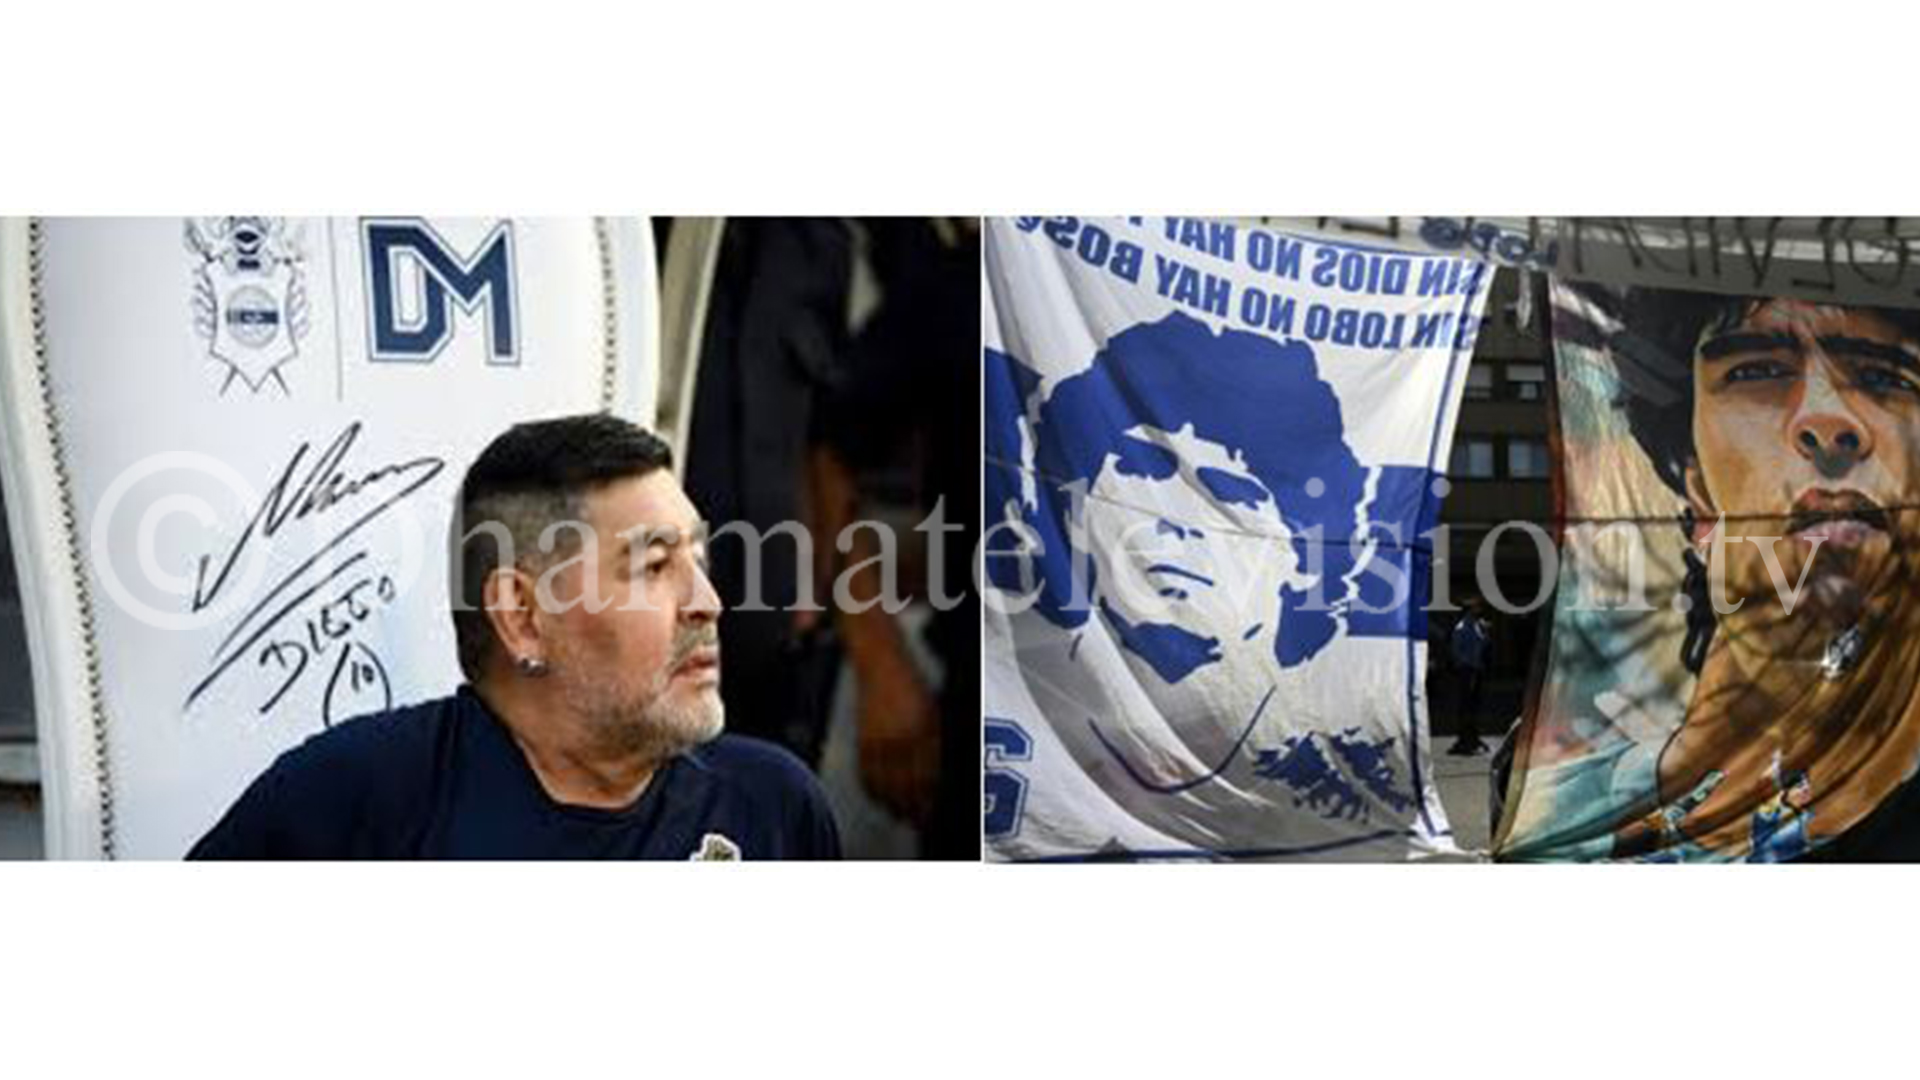 Maradona Hospitalized- ‘Mentally Unstable and Physically Weak, but getting better’ - Doctors